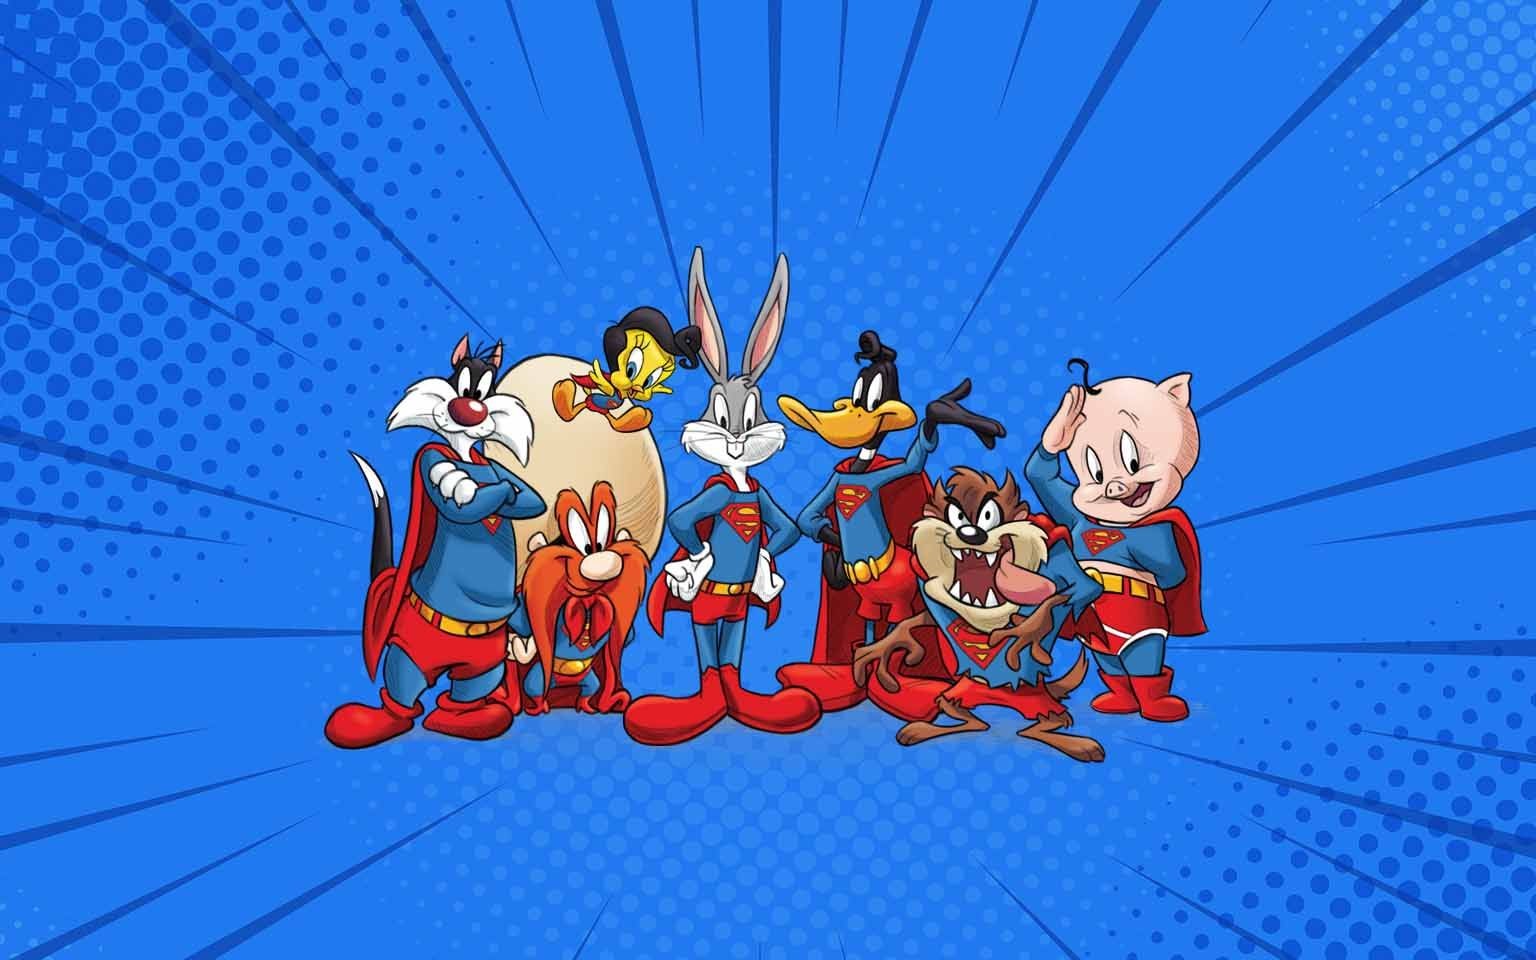 What's Up, Doc? Exclusive Looney Tunes Mash-ups